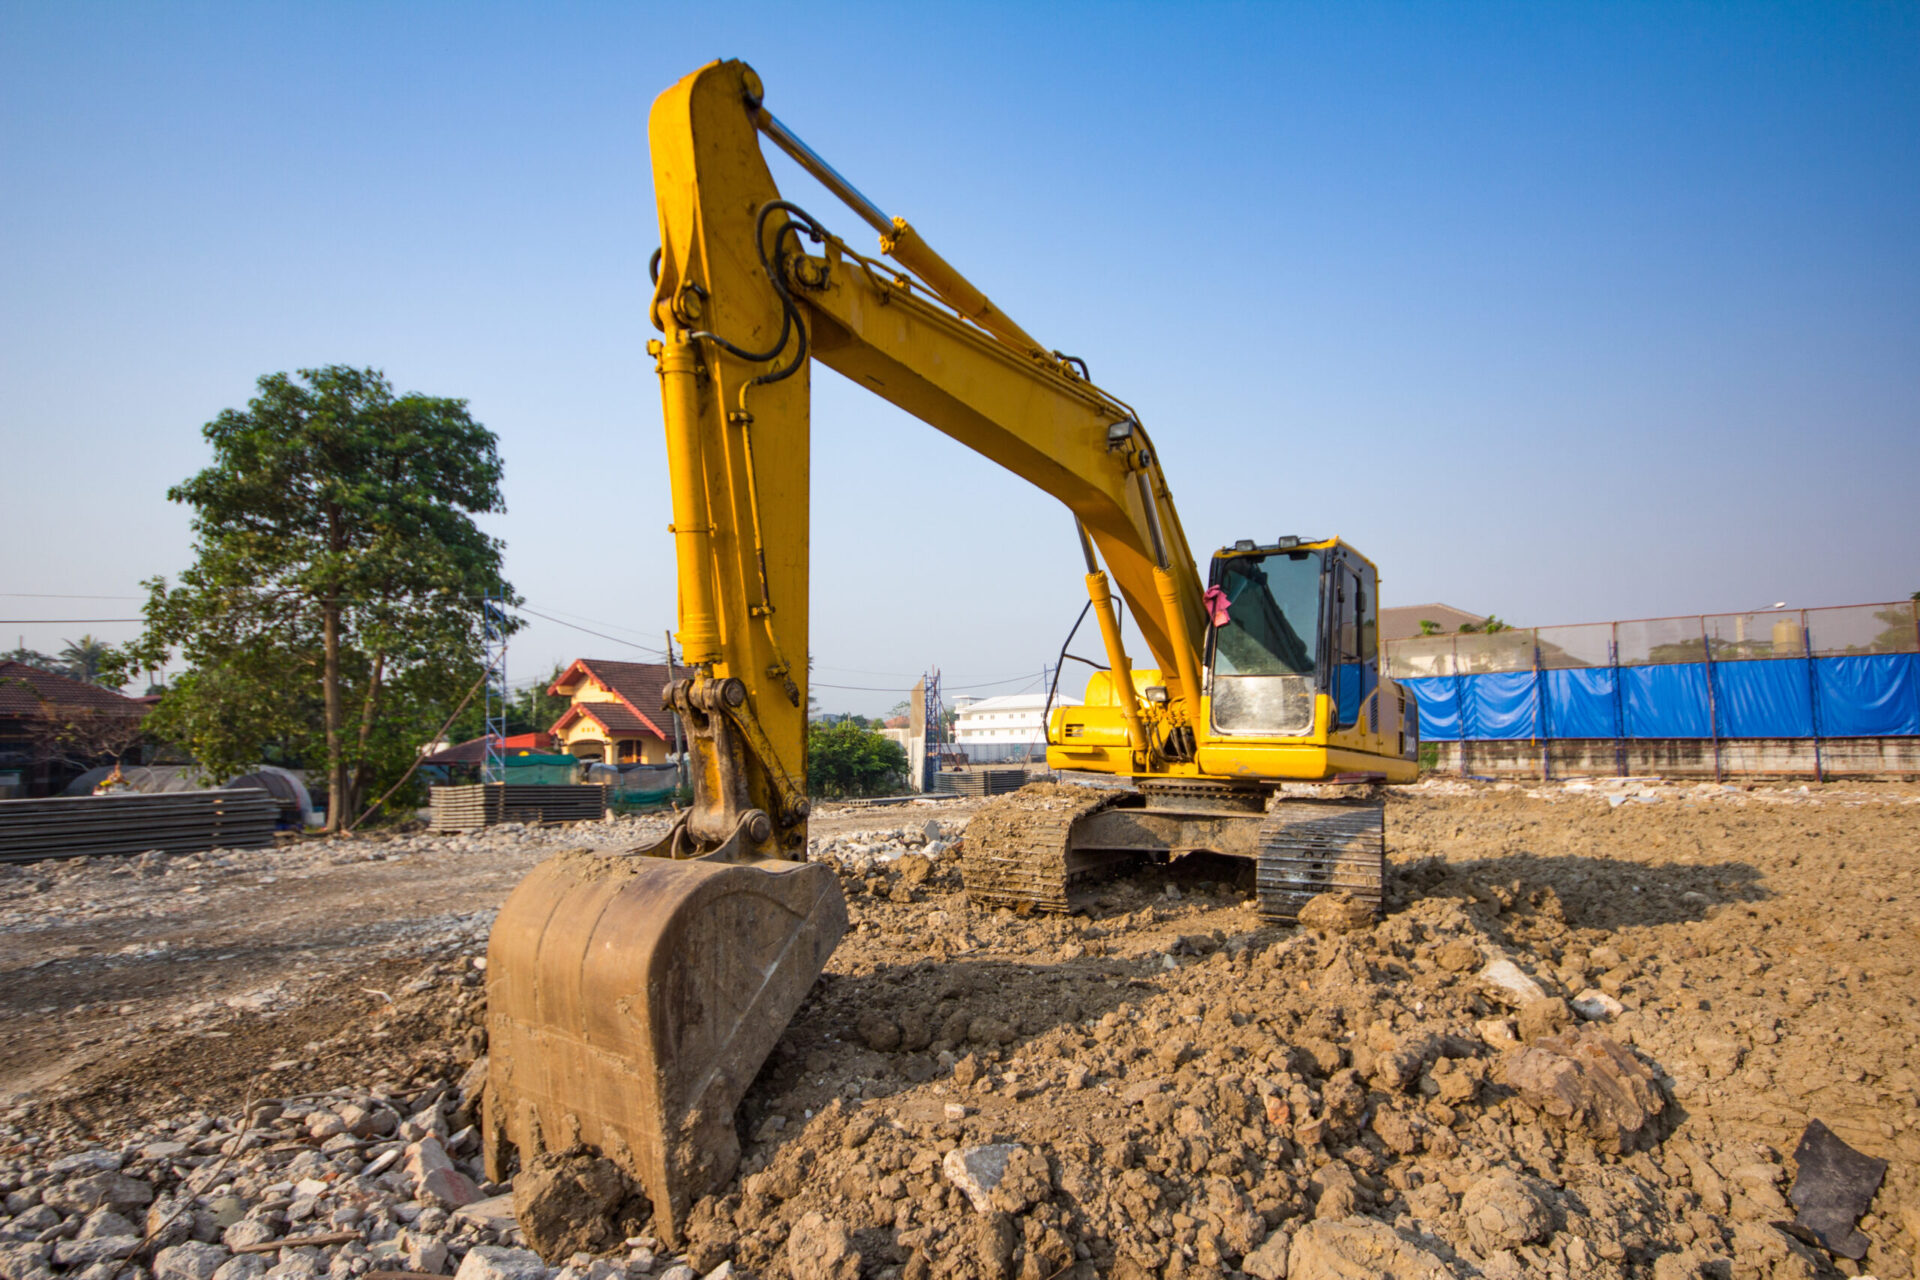 Yellow Backhoe Loader On Construction Site And Work